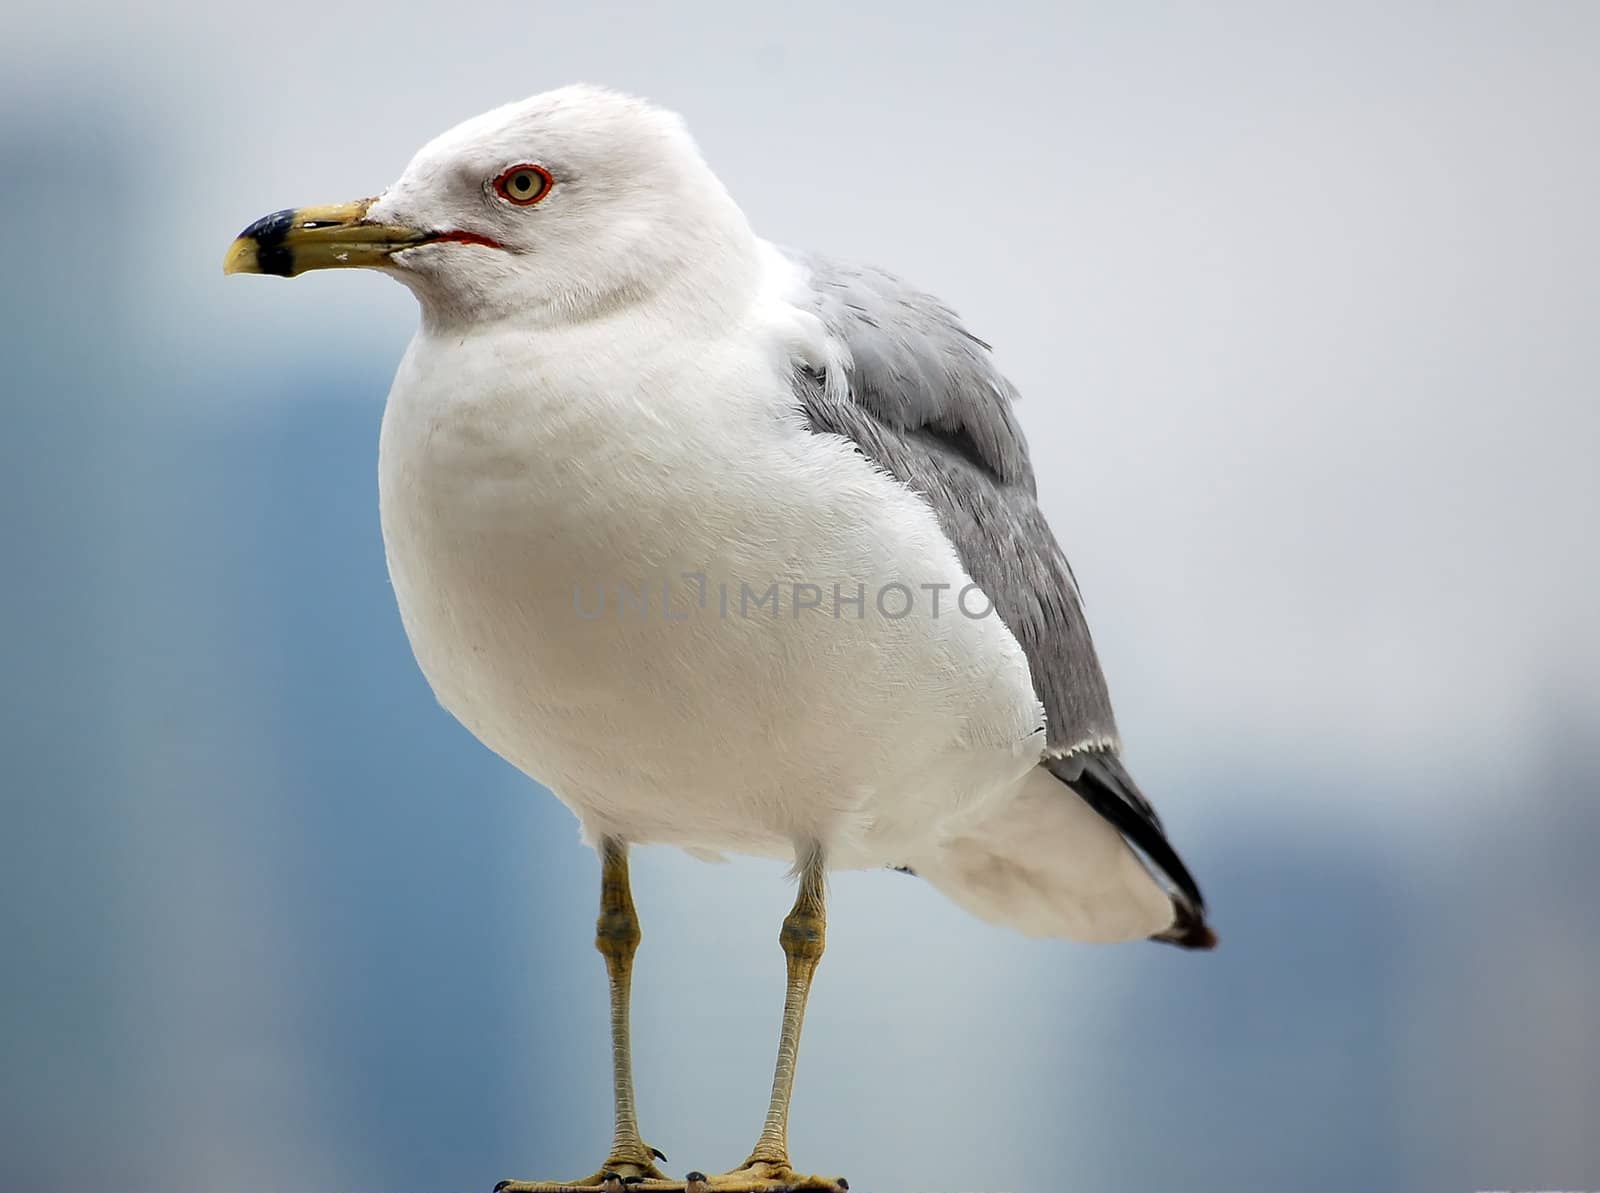 A close-up picture of a seagull standing